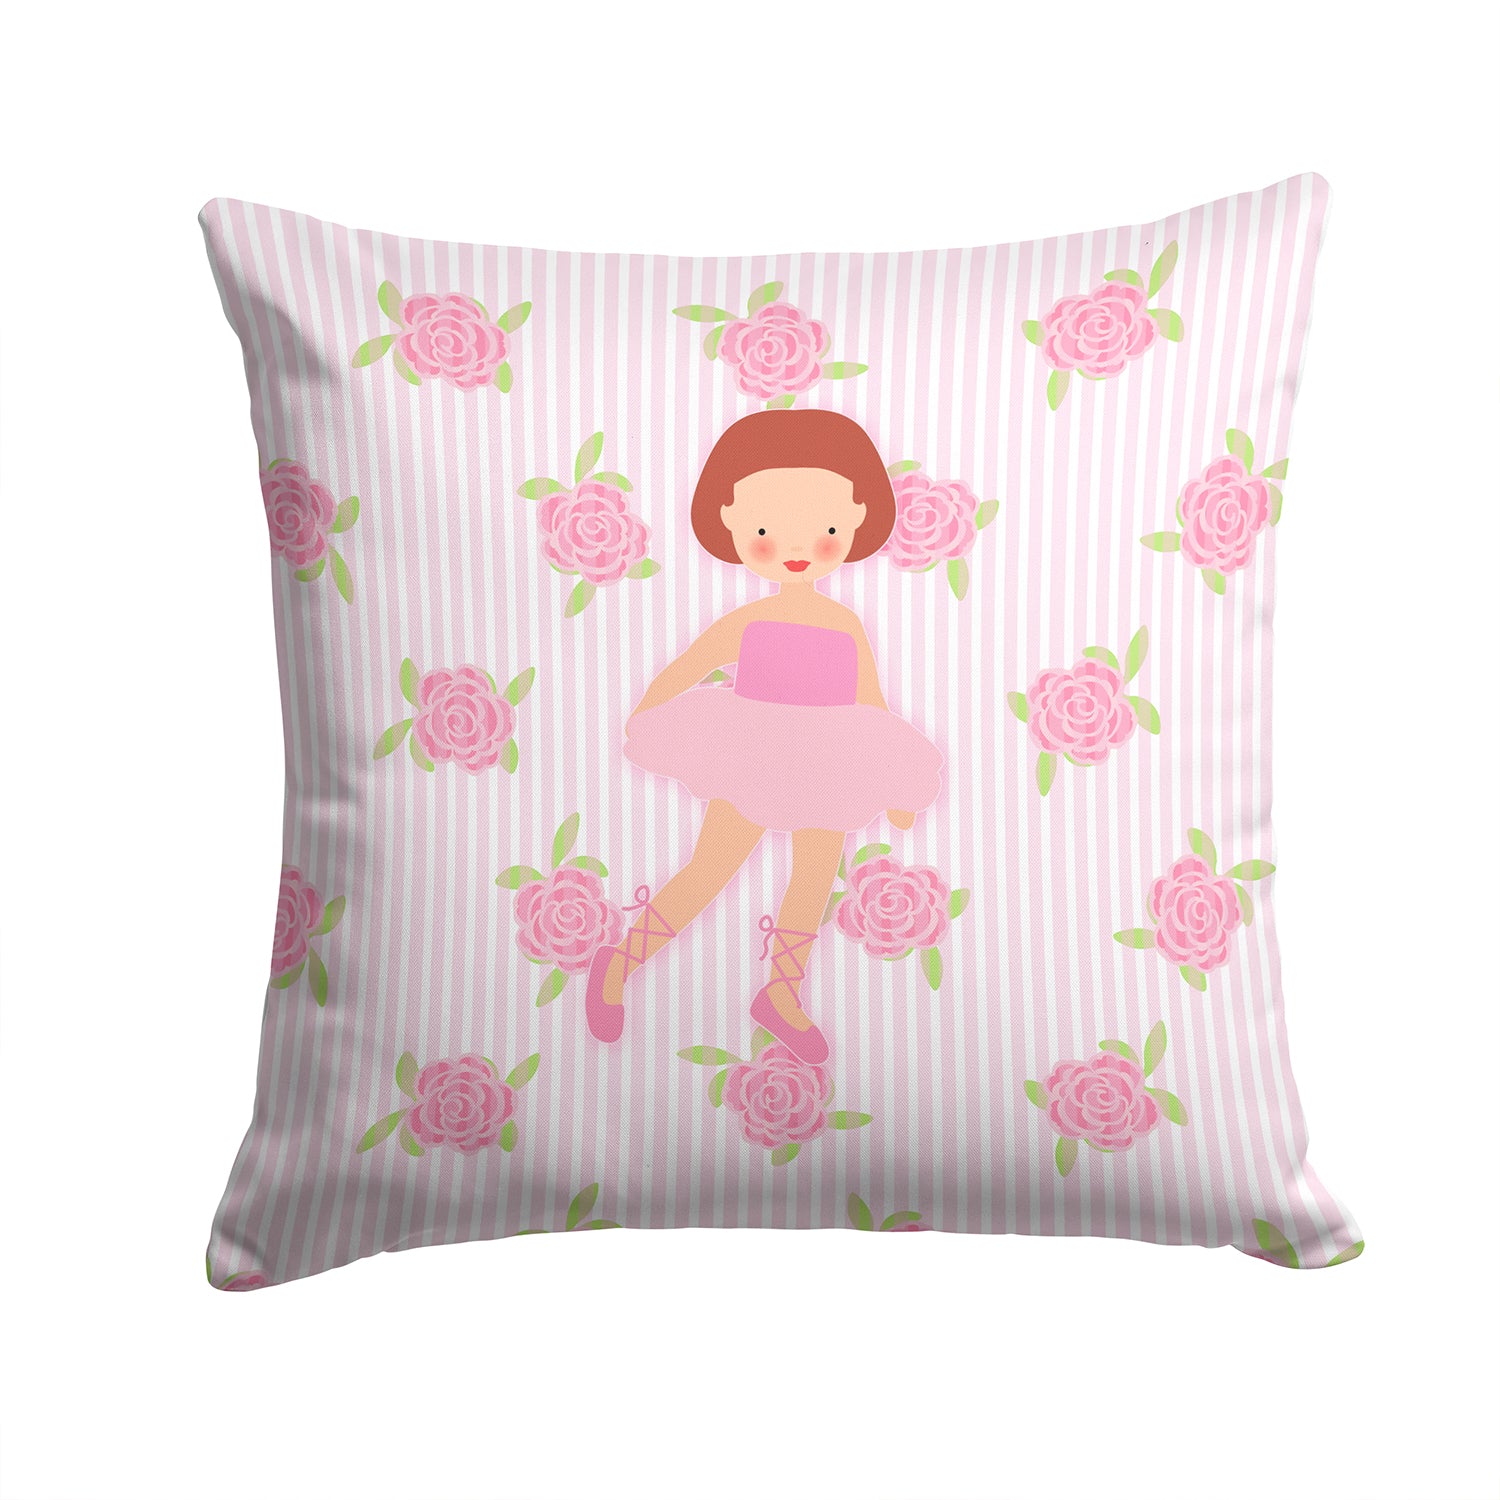 Ballerina Red Short Hair Fabric Decorative Pillow BB5191PW1414 - the-store.com